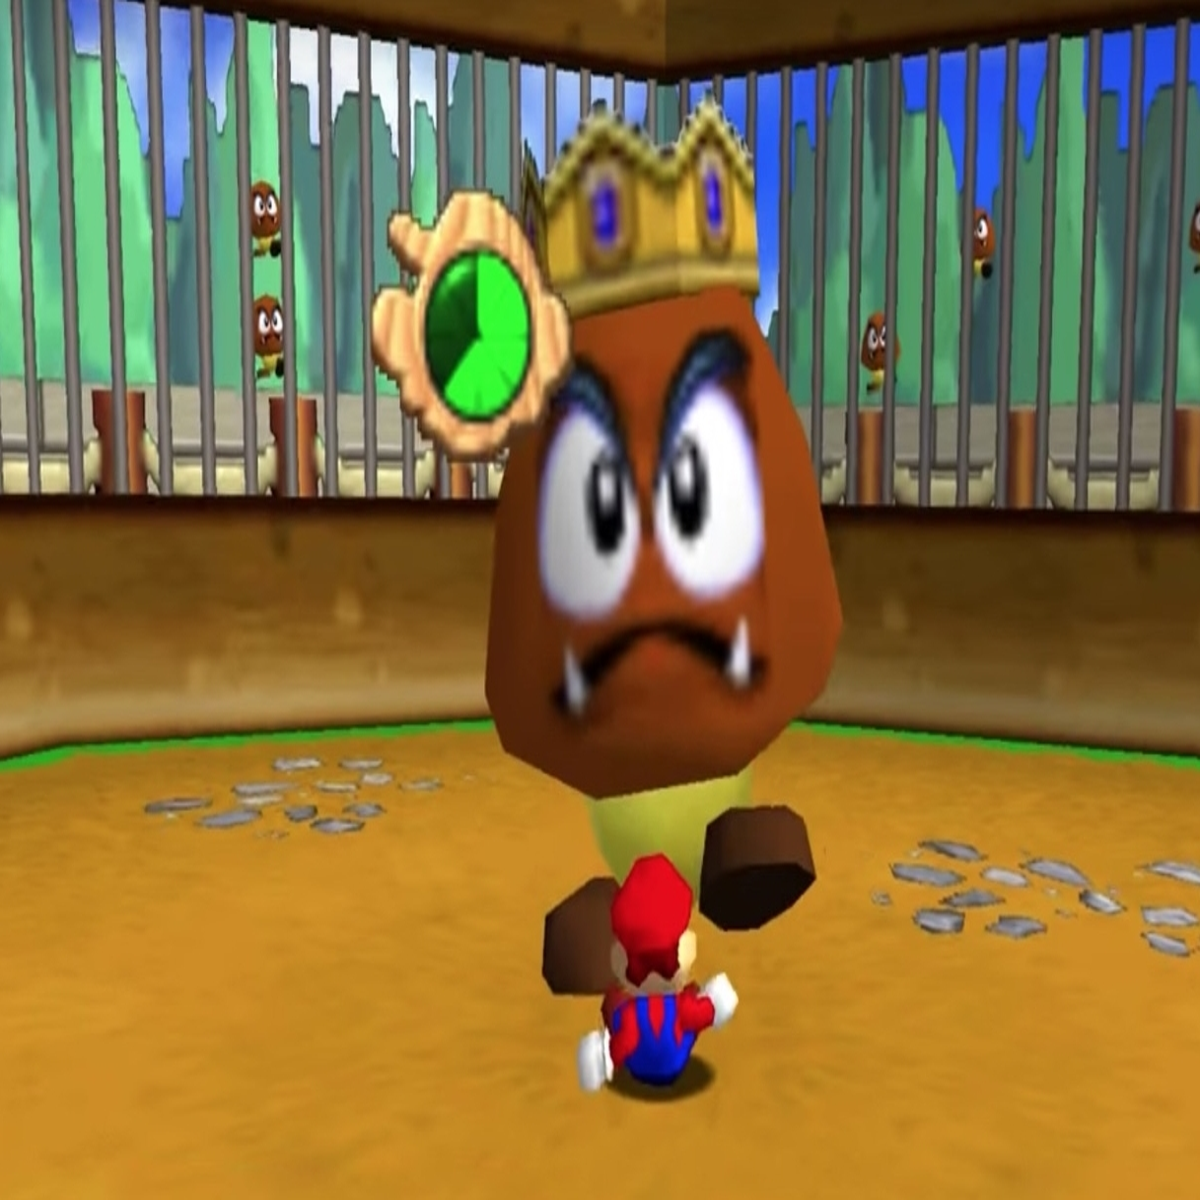 Gotta Be Frank - Sonic & Knuckles in Super Mario 64 ONLINE! #SuperMario64  #N64 #SuperMario64Online